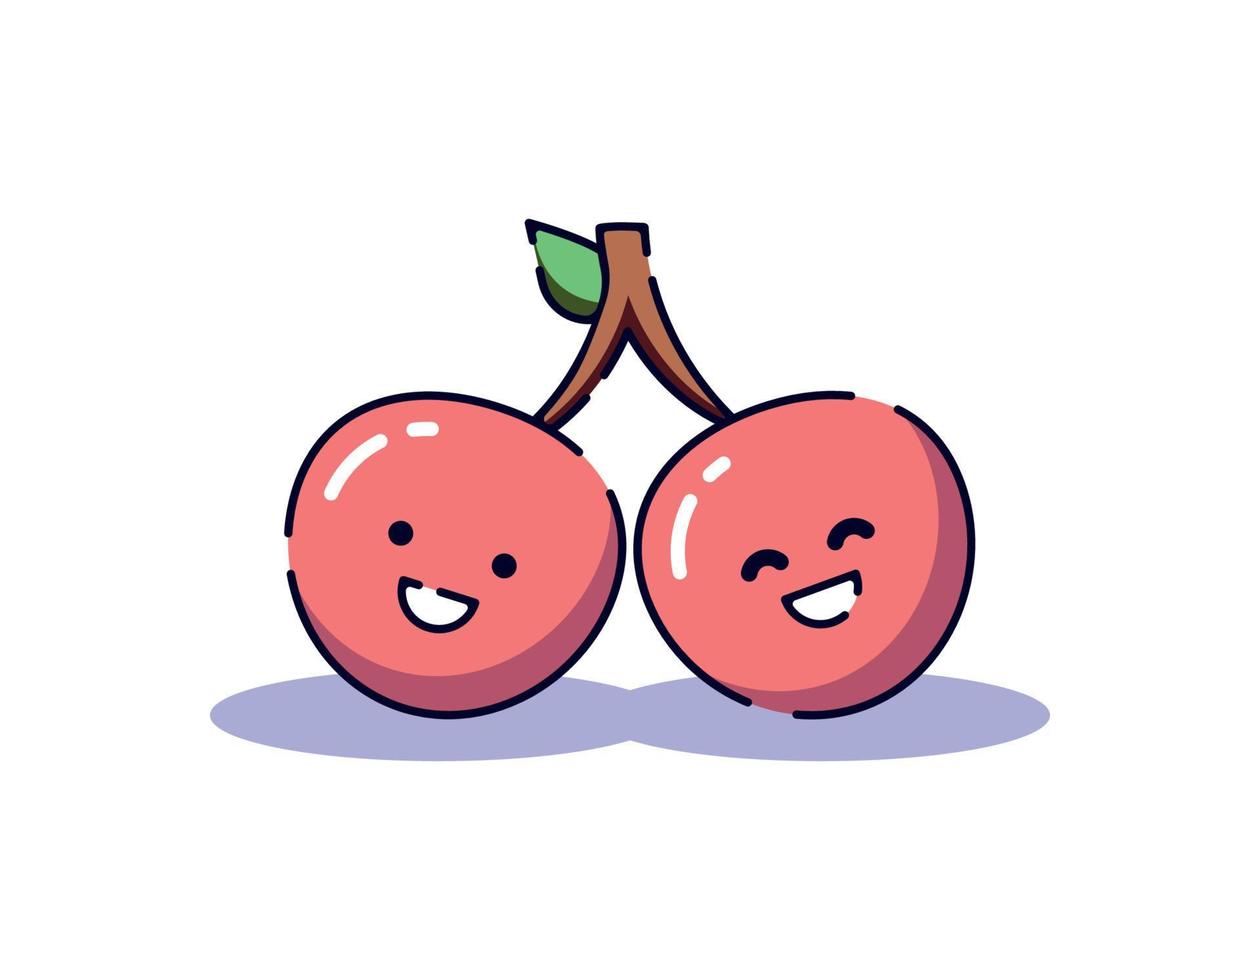 Isolated vector illustration of cherry with bright smile. Suitable for web sites, apps, books, advertisement etc